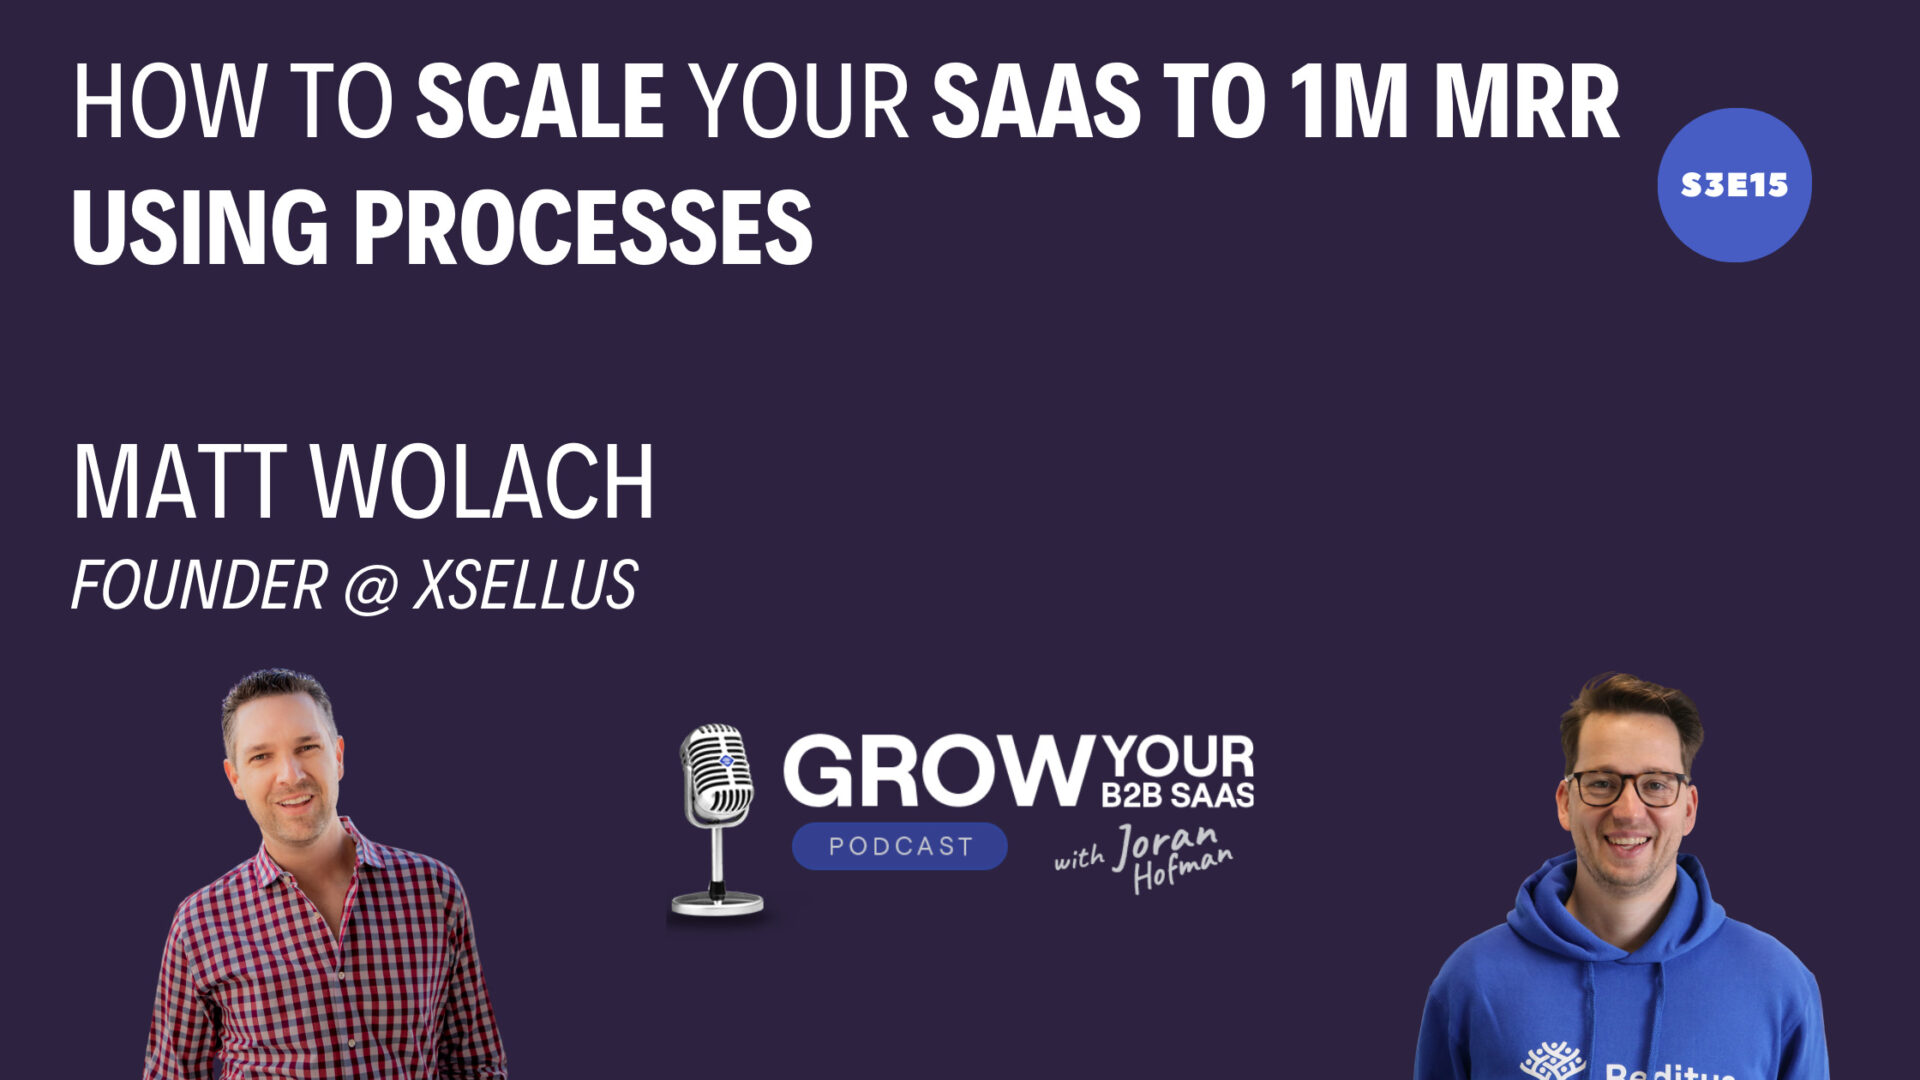 S3E15 – How to scale your SaaS to 1M MRR using processes with Matt Wolach